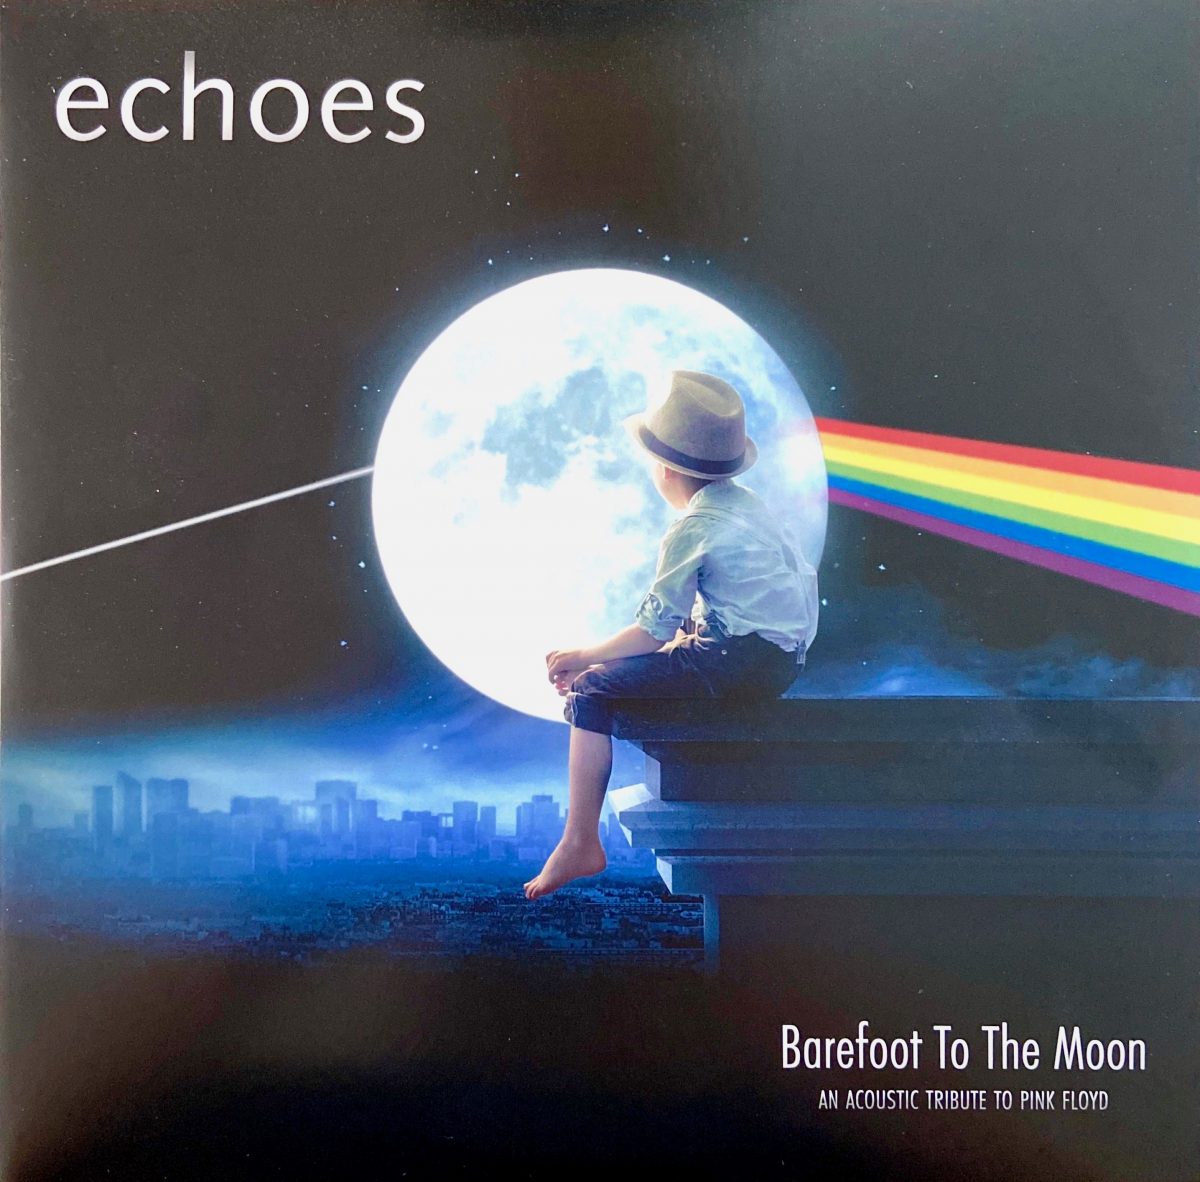 echoes from the dark side of the moon